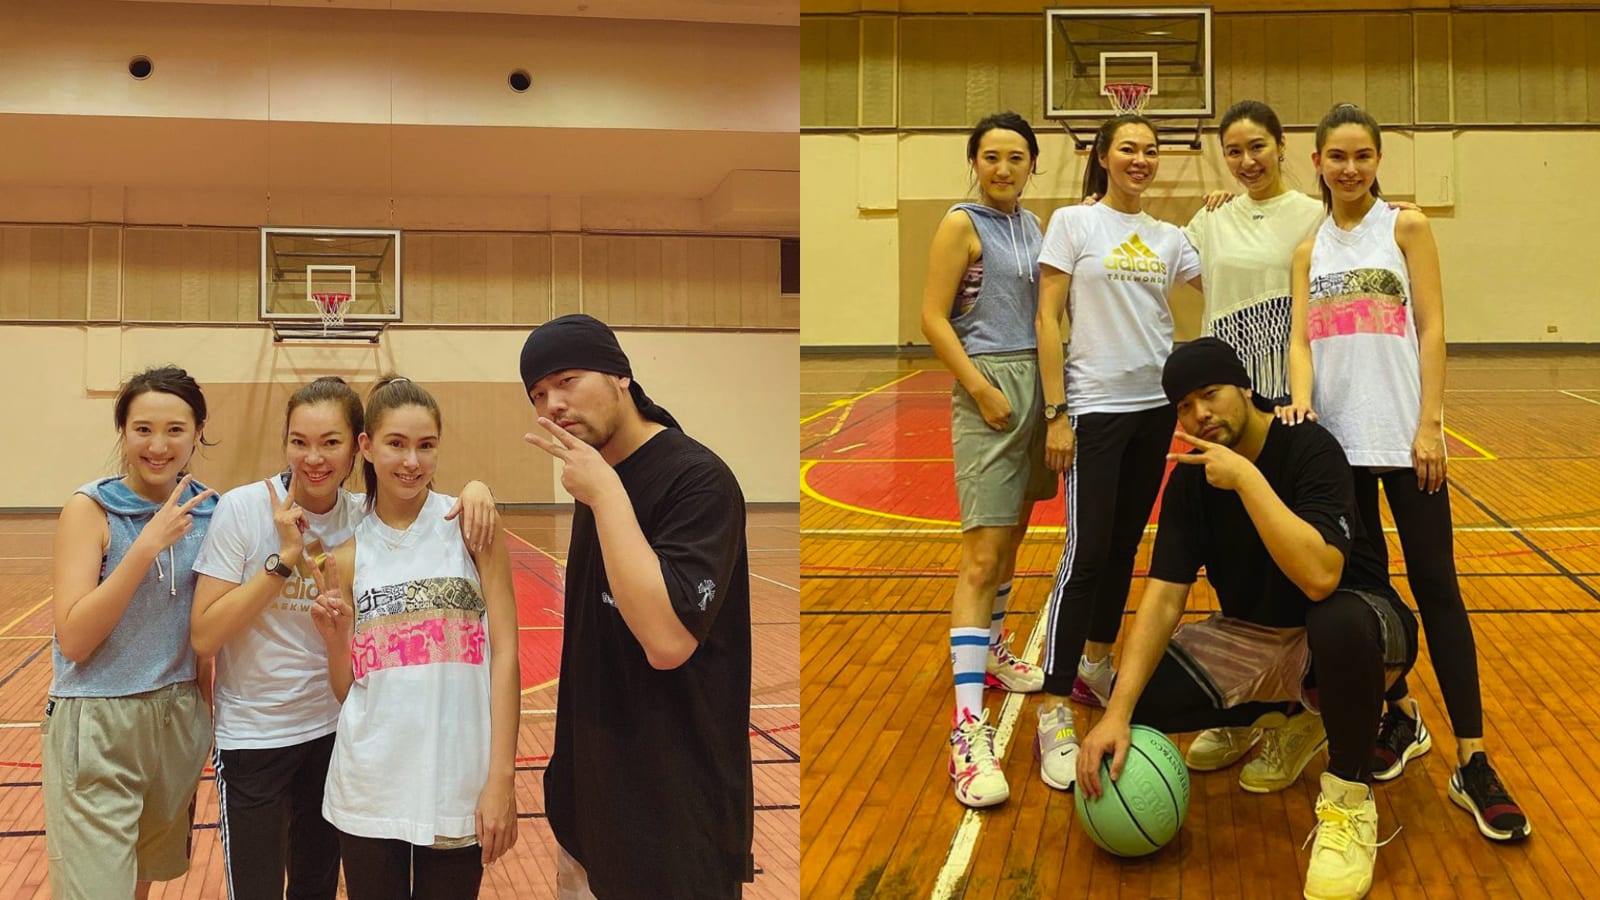 Jay Chou’s New Basketball Buddies All Have Really Influential Backgrounds